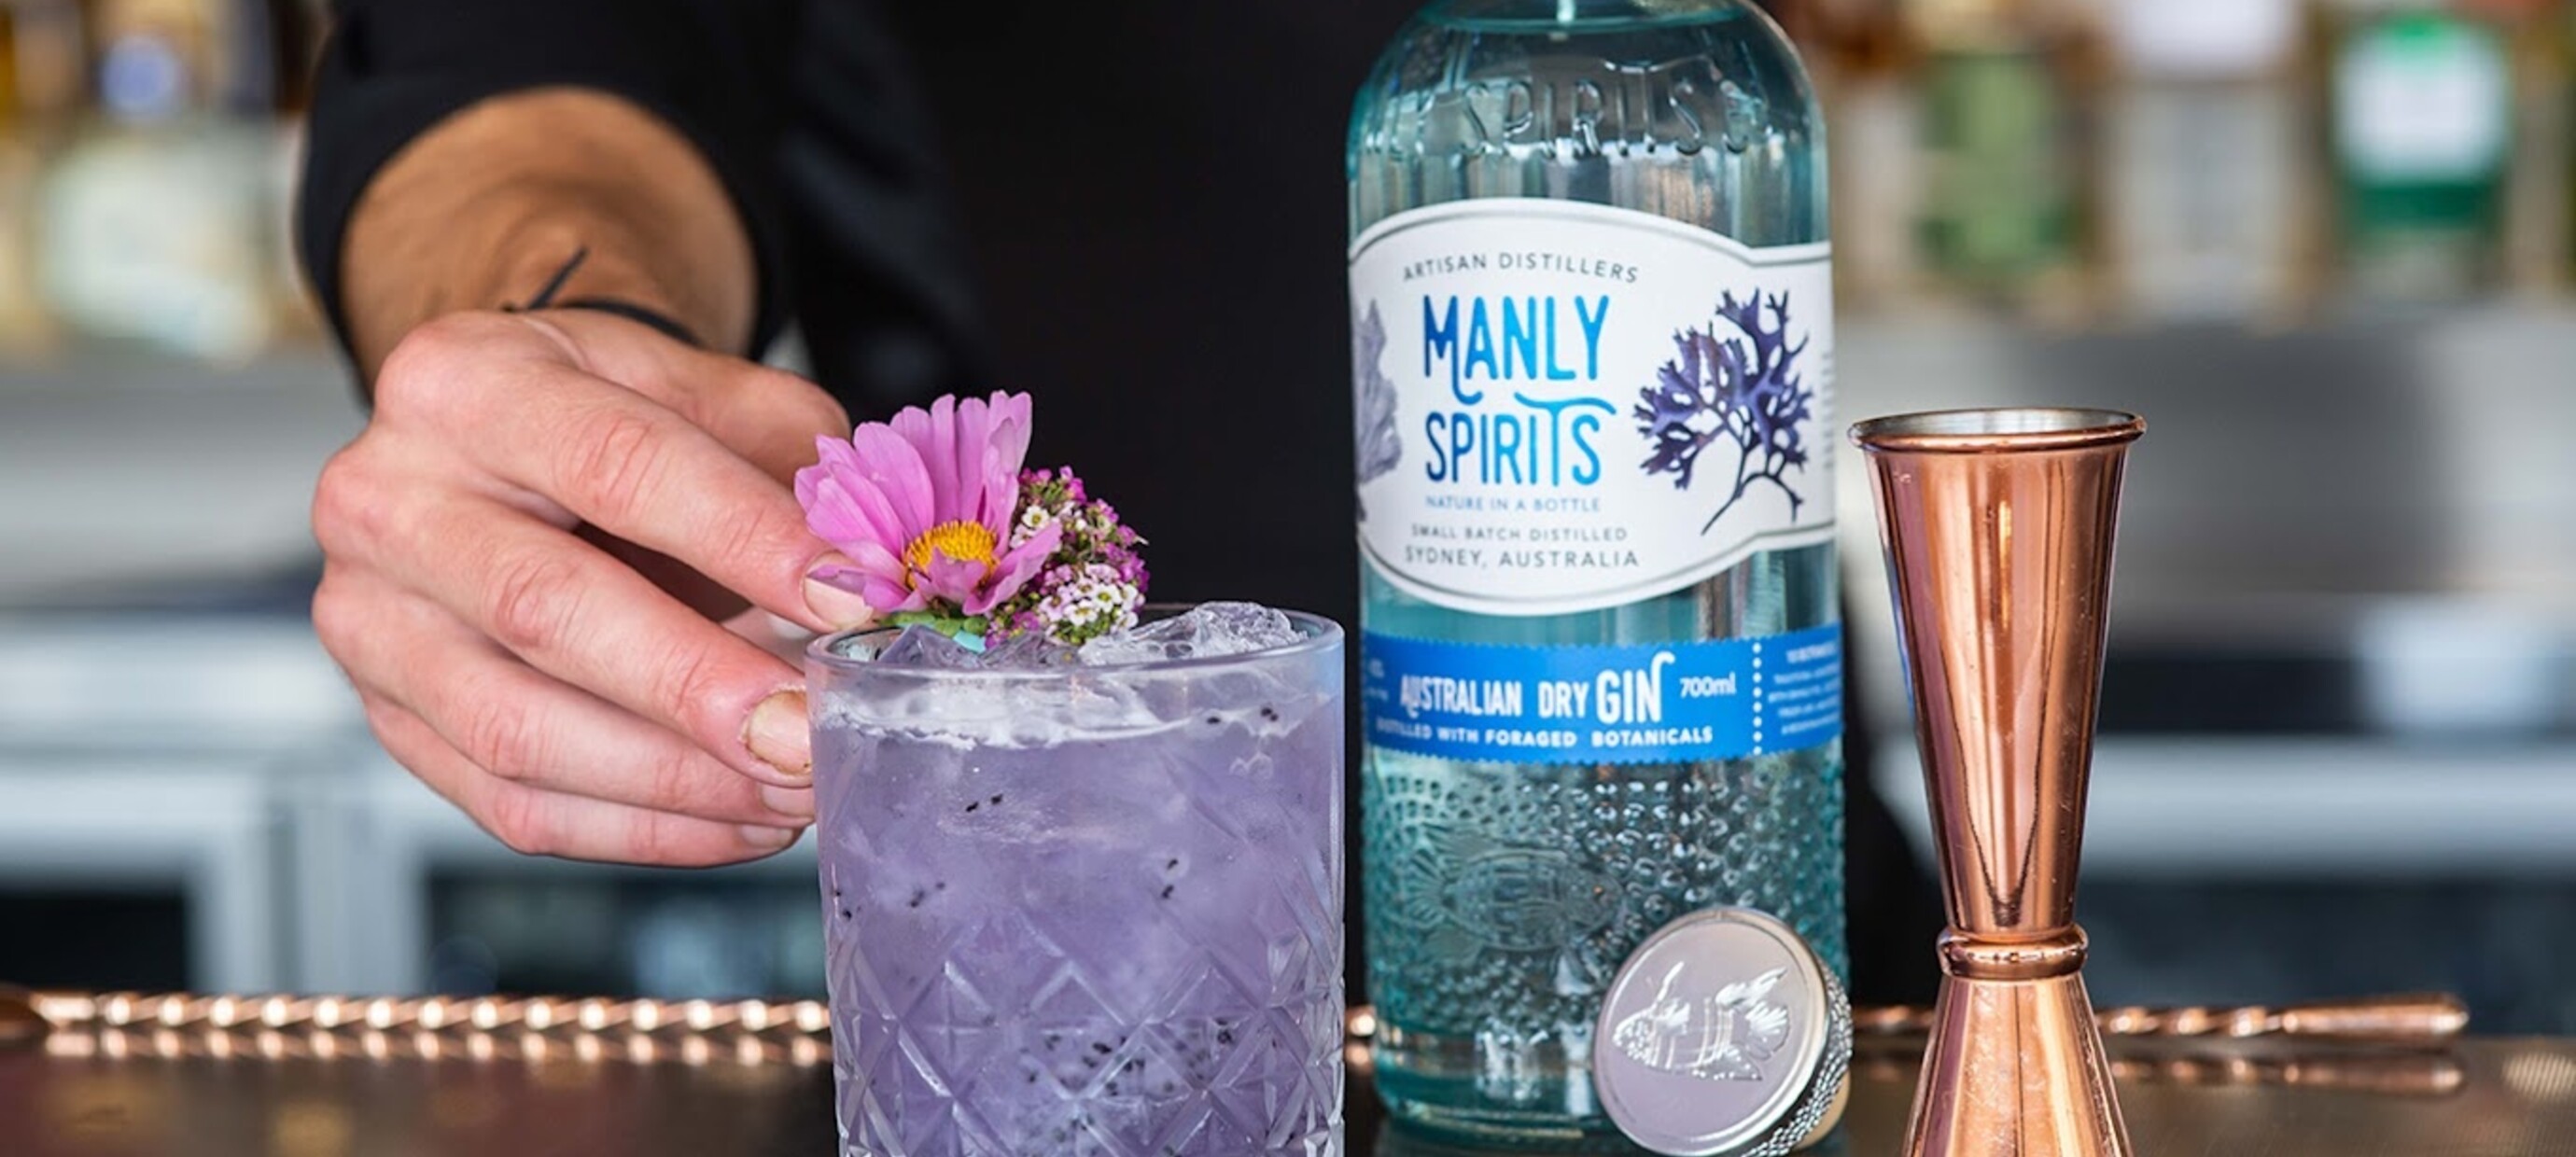 Manly Spirits Co. 